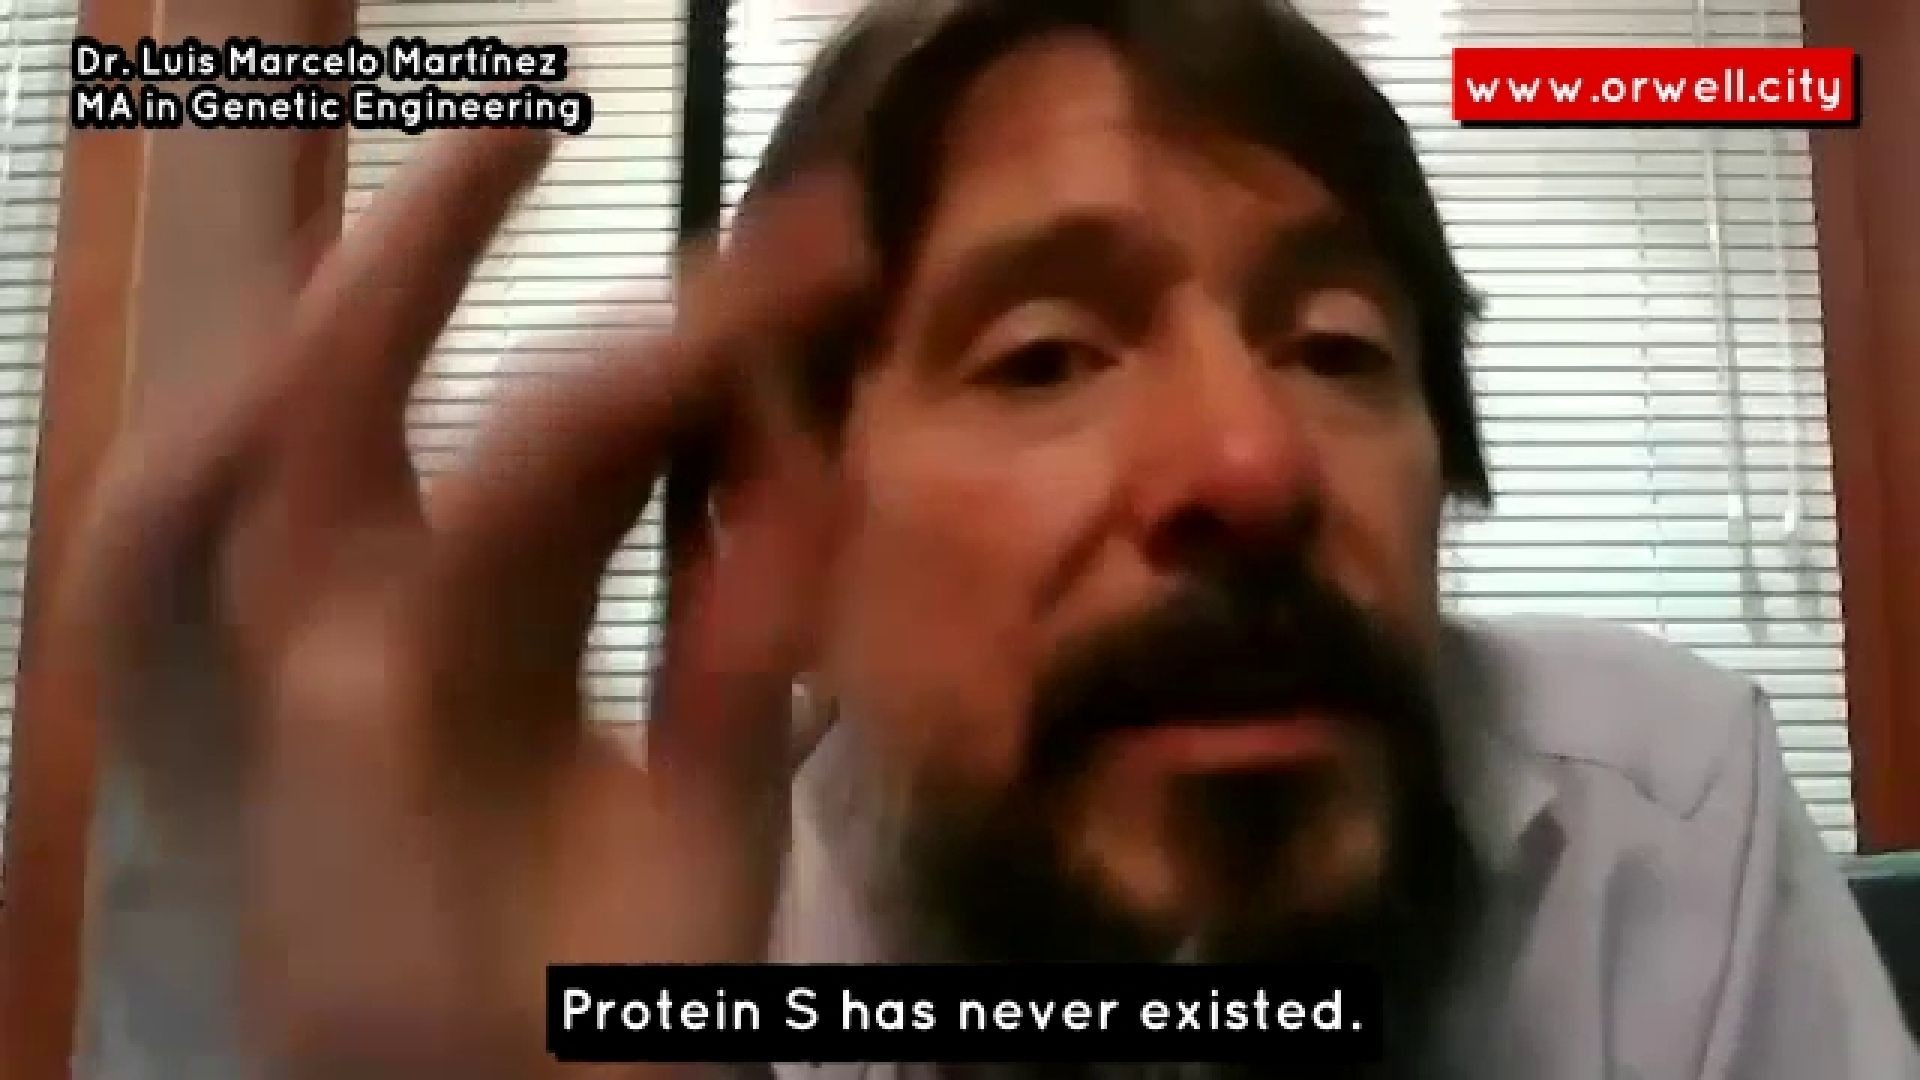 Dr. Luis Marcelo Martínez: The Spike Protein Has Never Existed